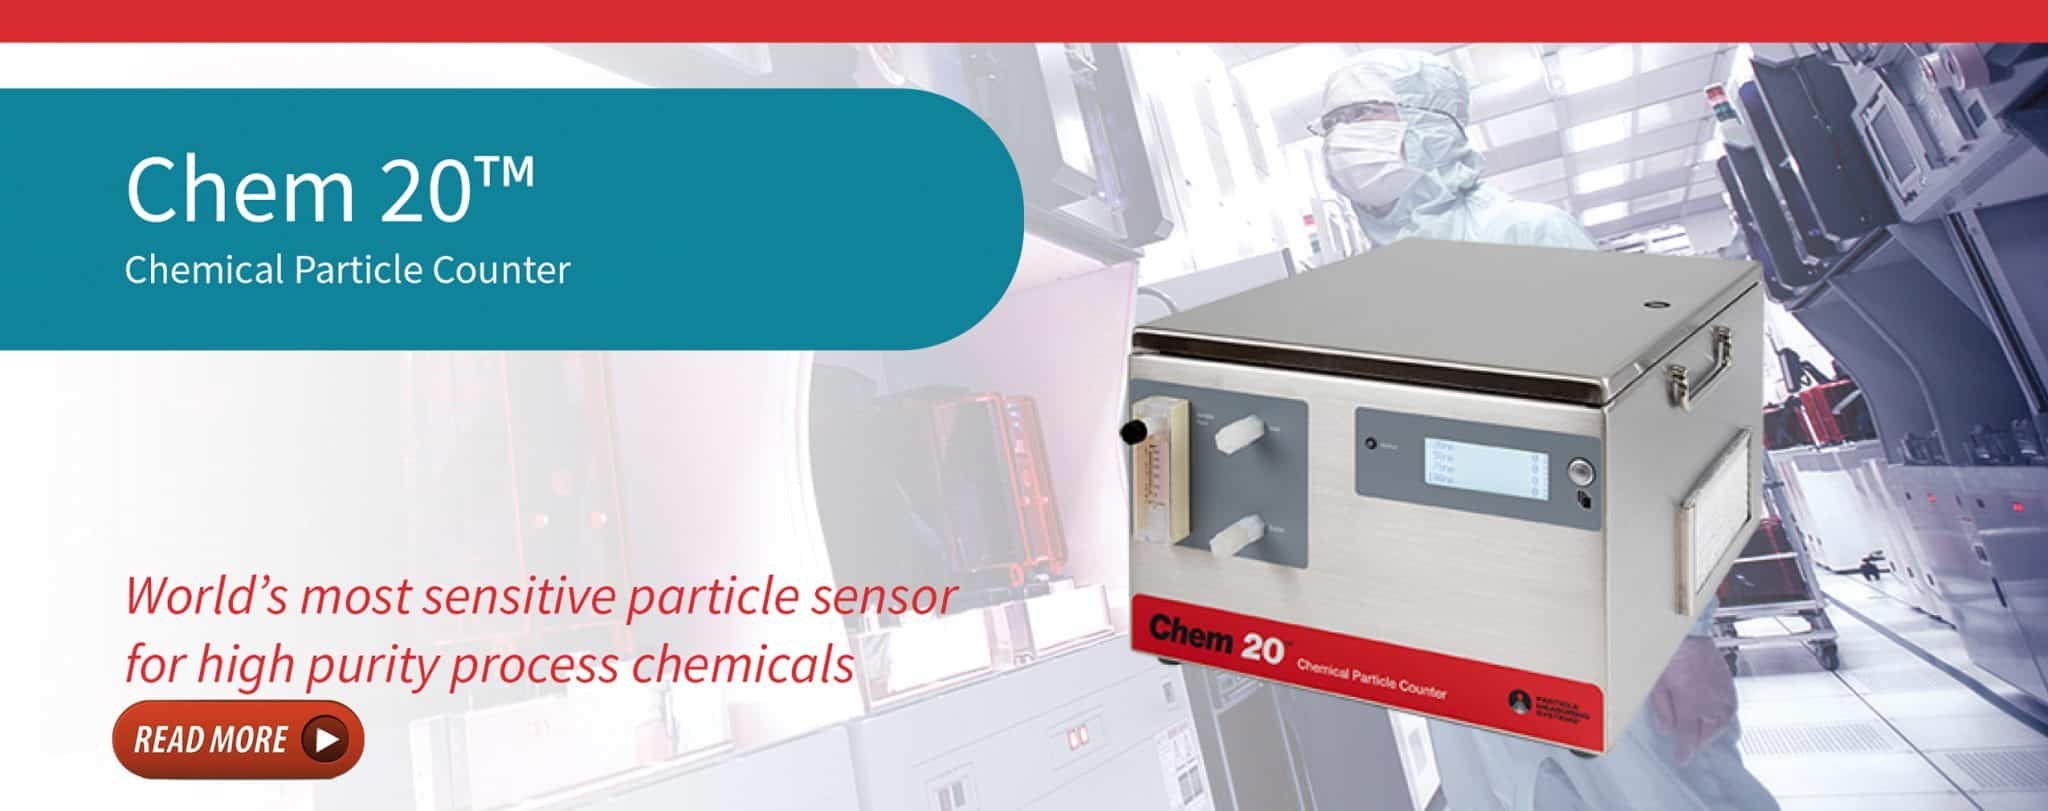 Chemical Particle Counter: Chem 20™